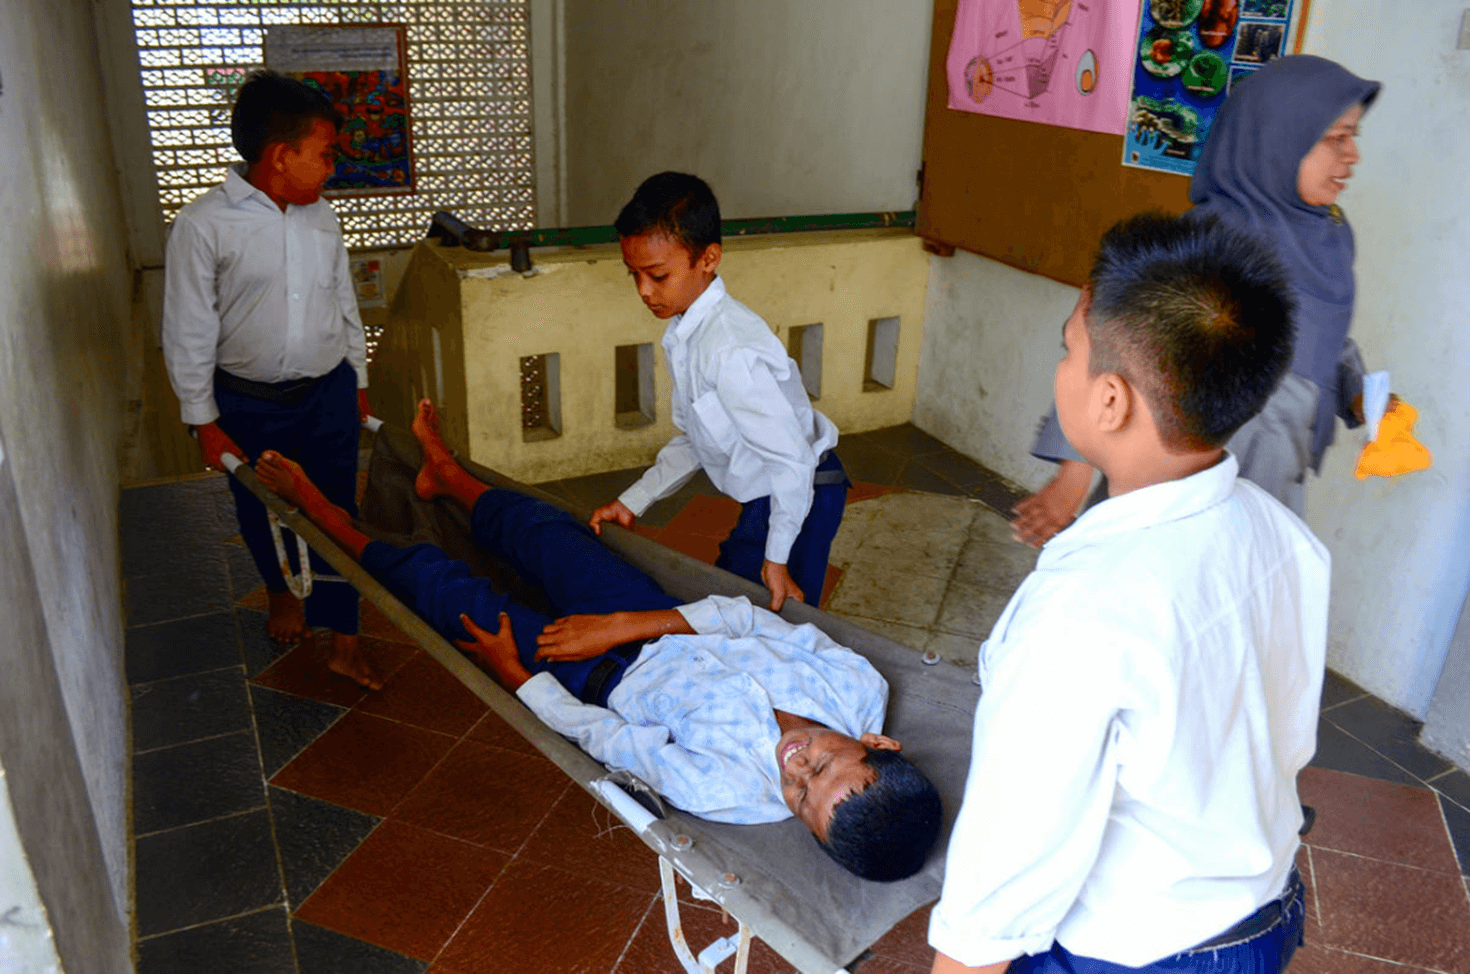  Children do an earthquake preparedness drill at school, carrying a fellow student in a stretcher.